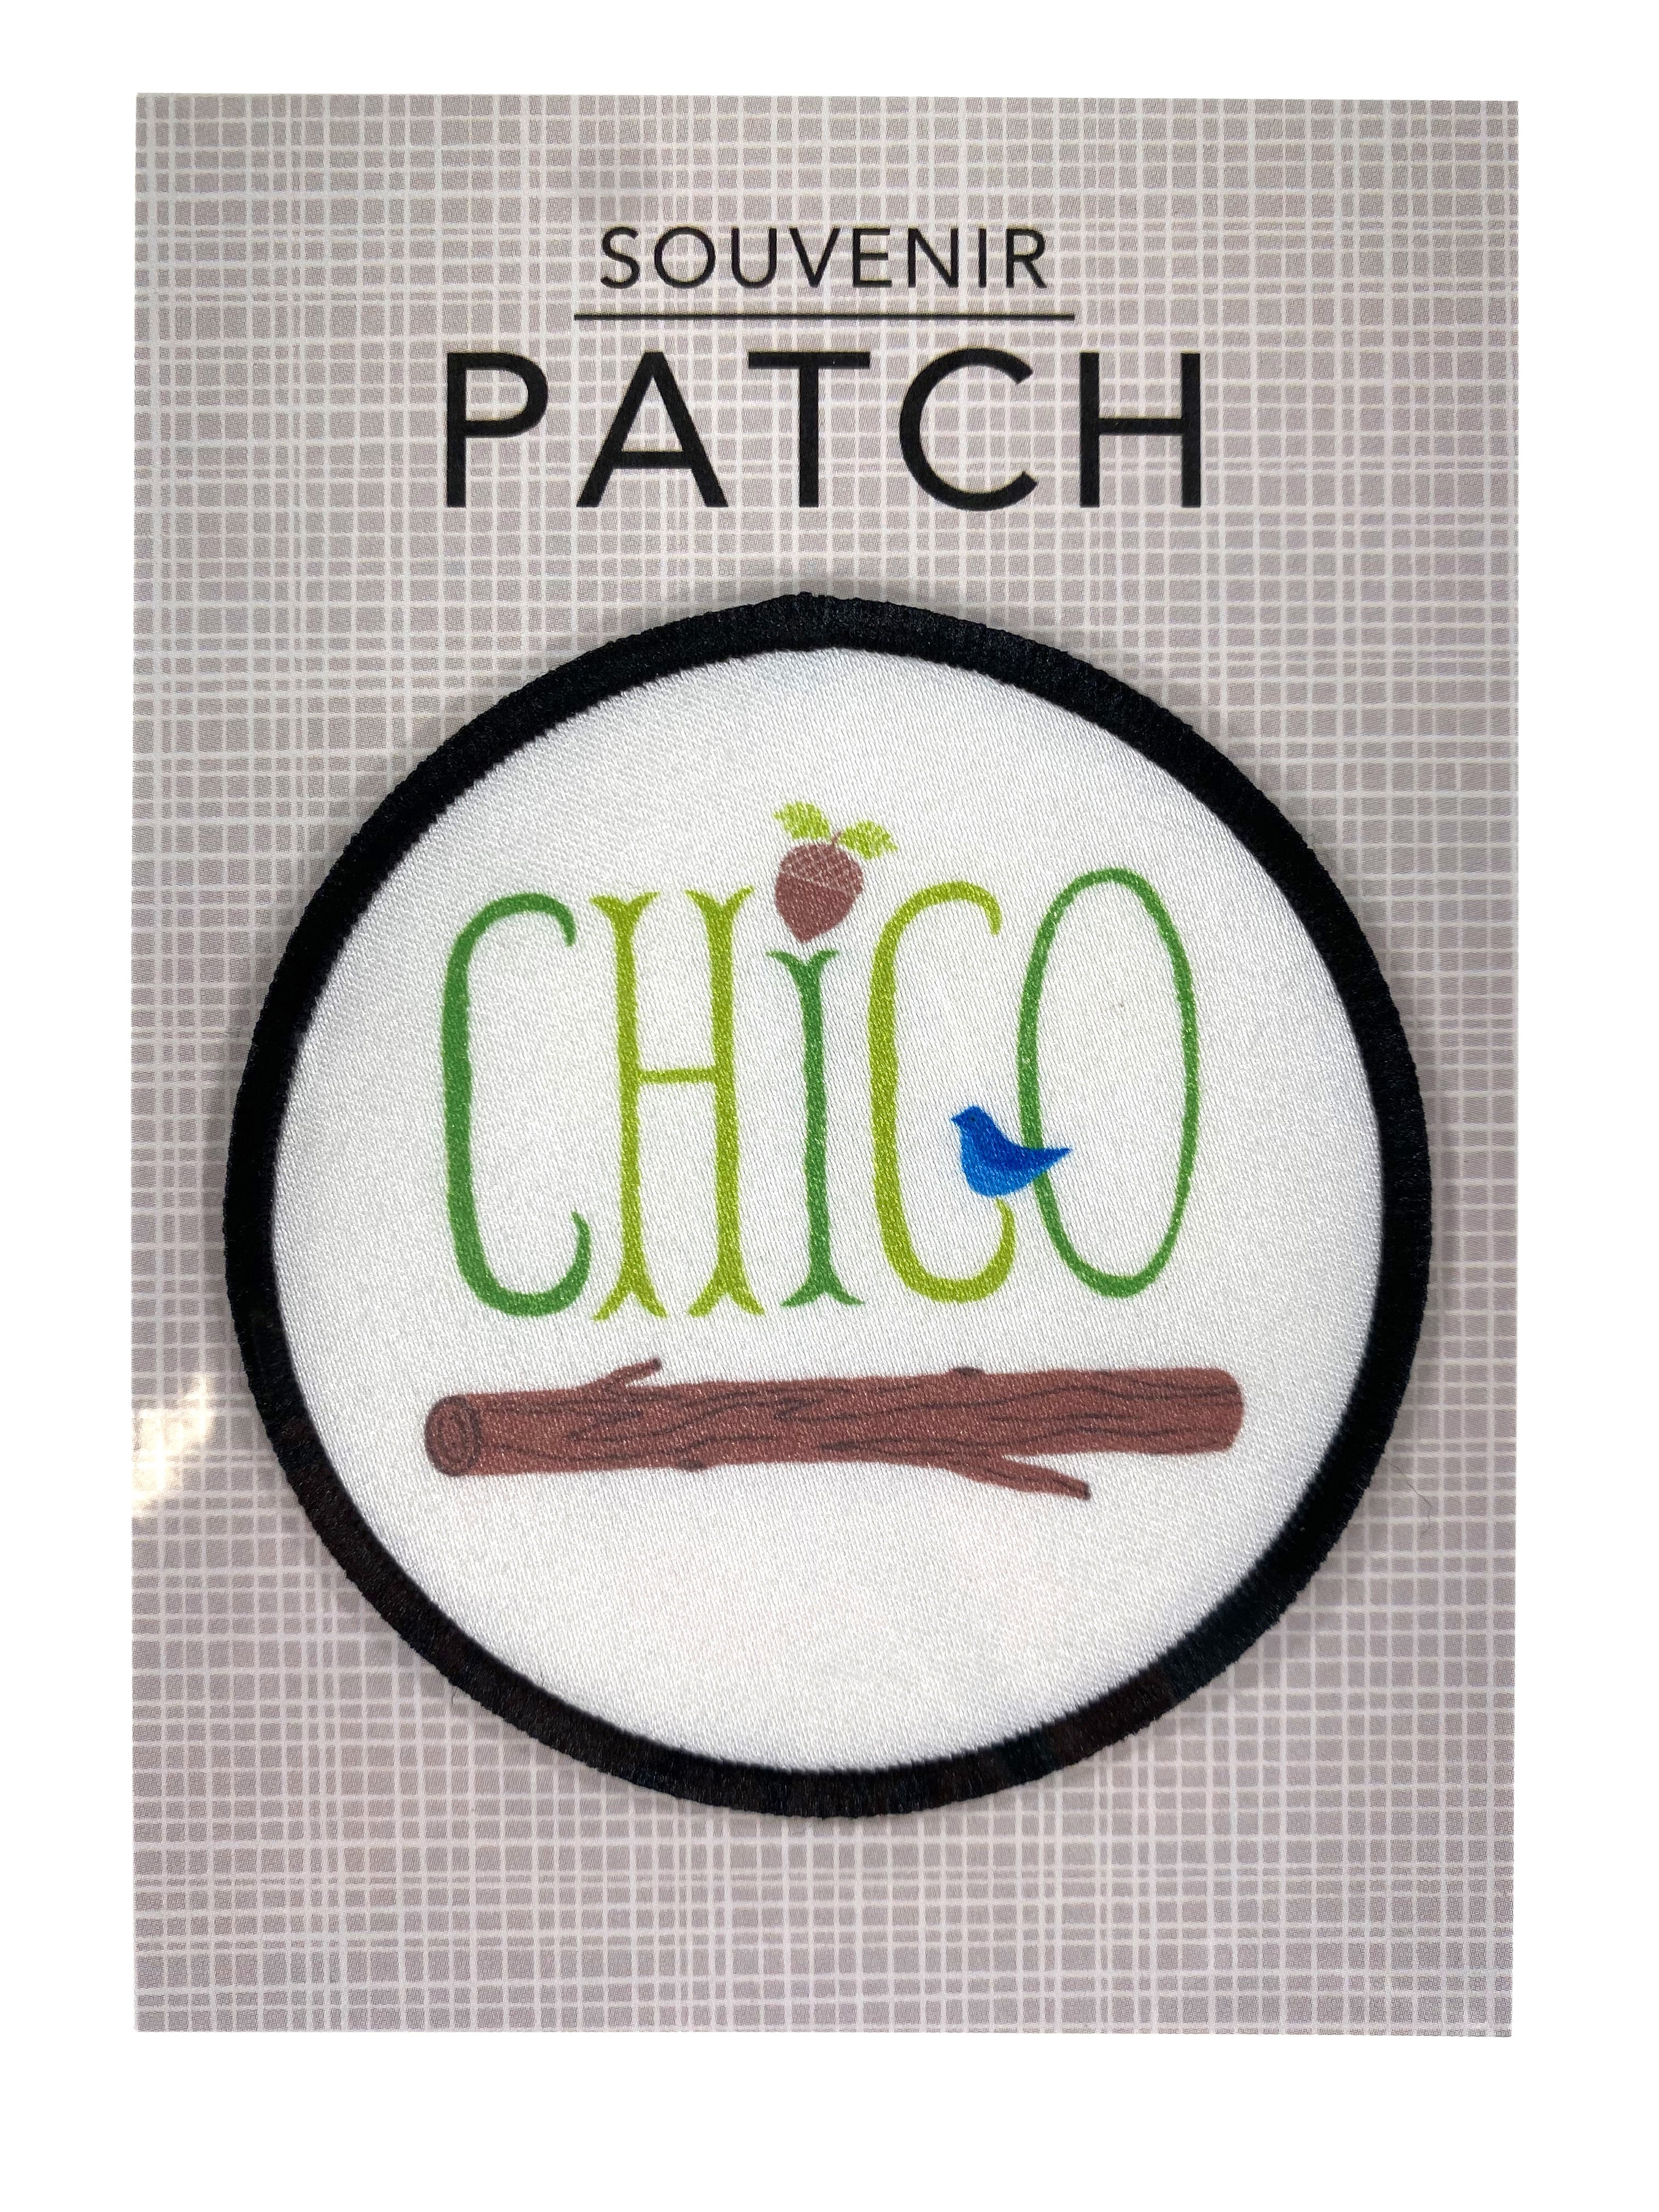 Chico Patch - Acorn Town    